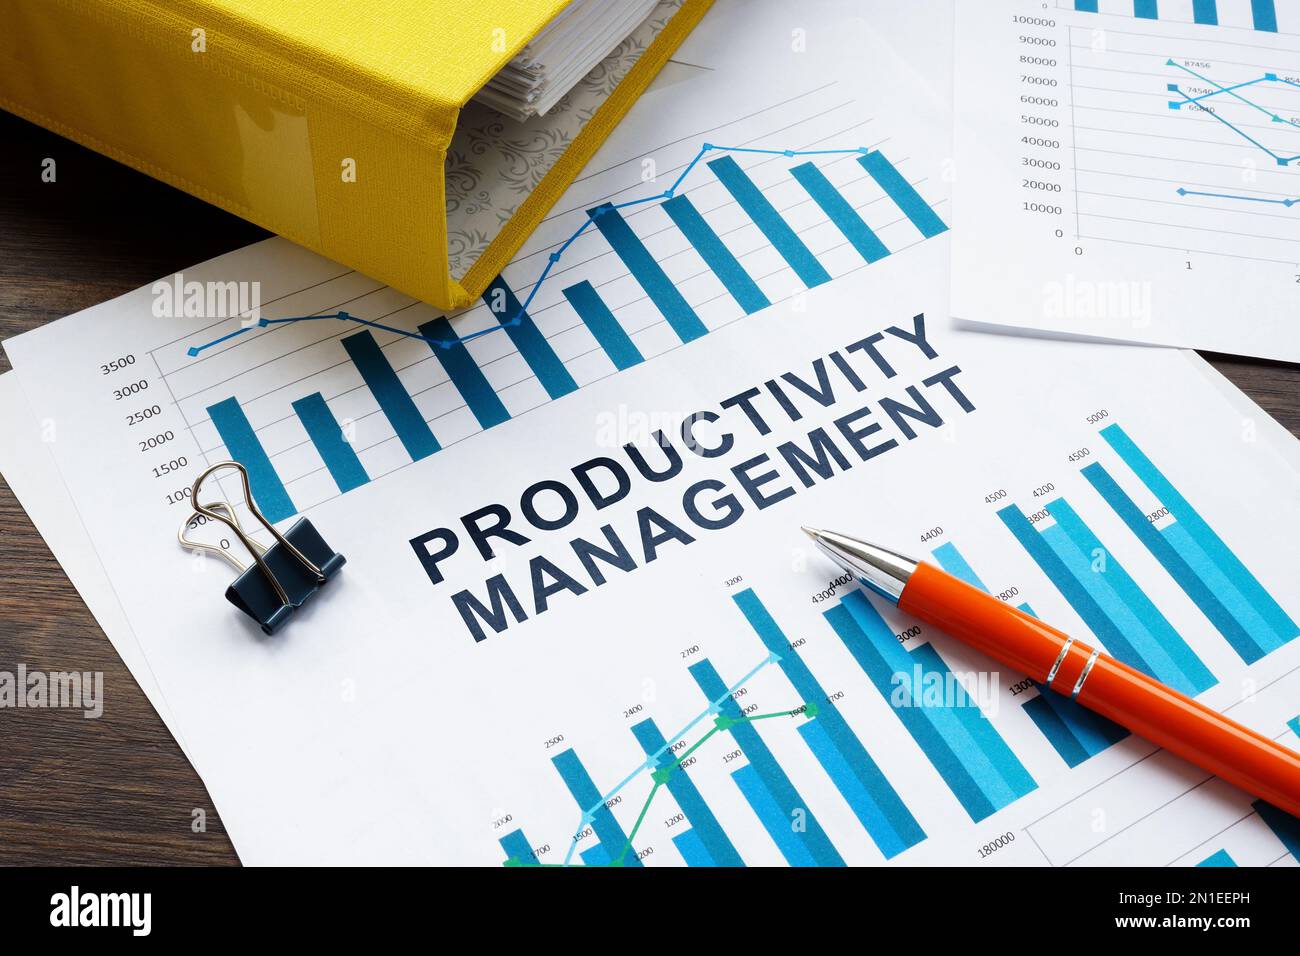 A Folder and report about productivity management. Stock Photo